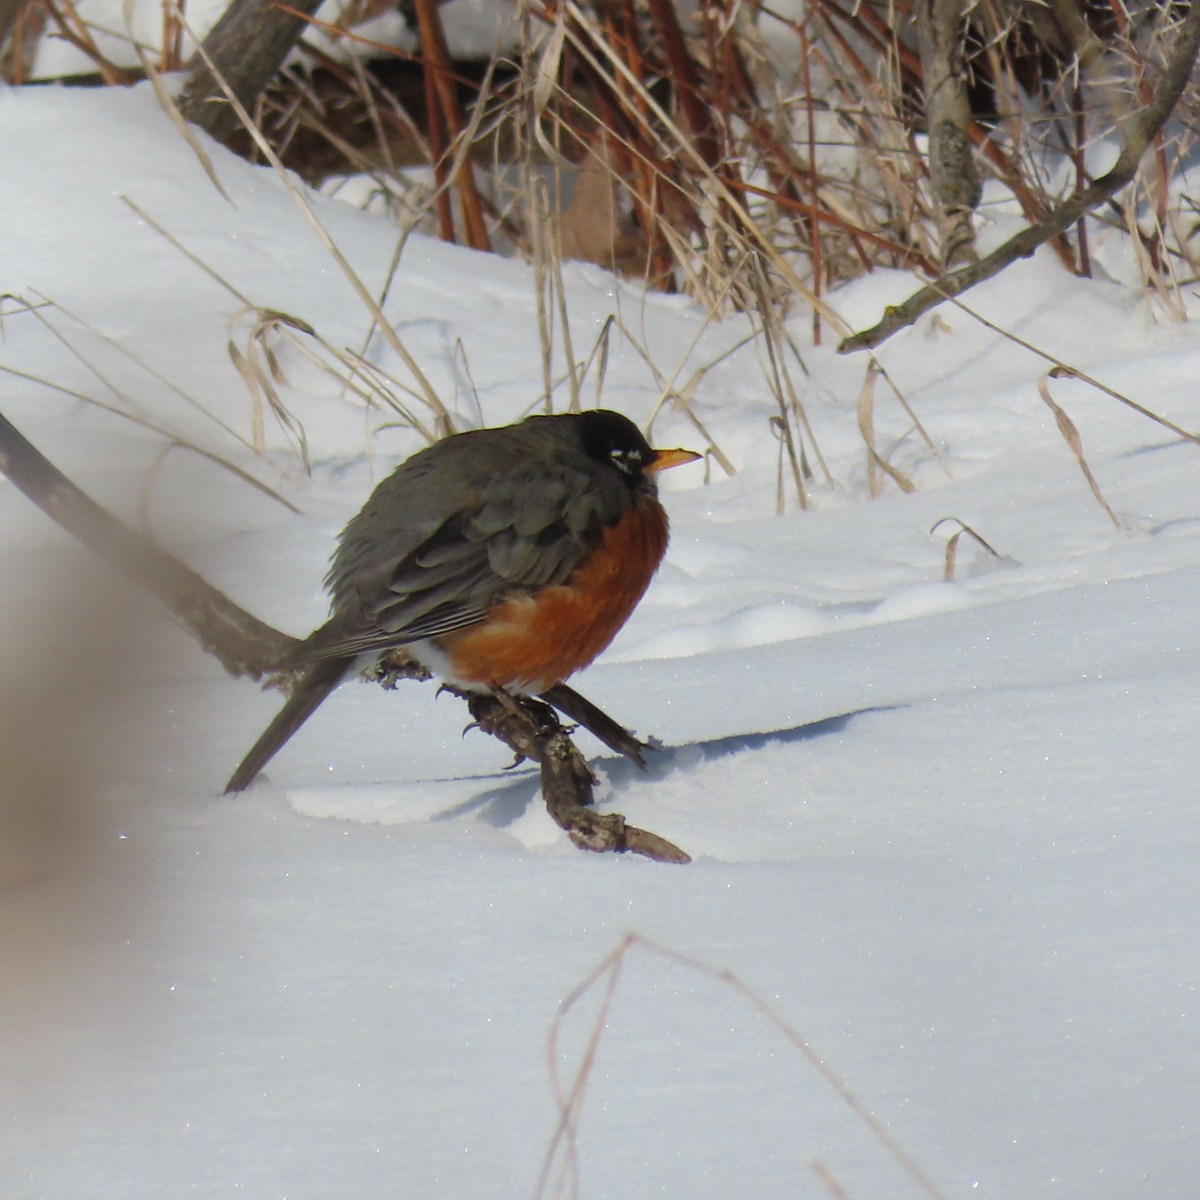 A Robin puffed up on a low branch near the snow